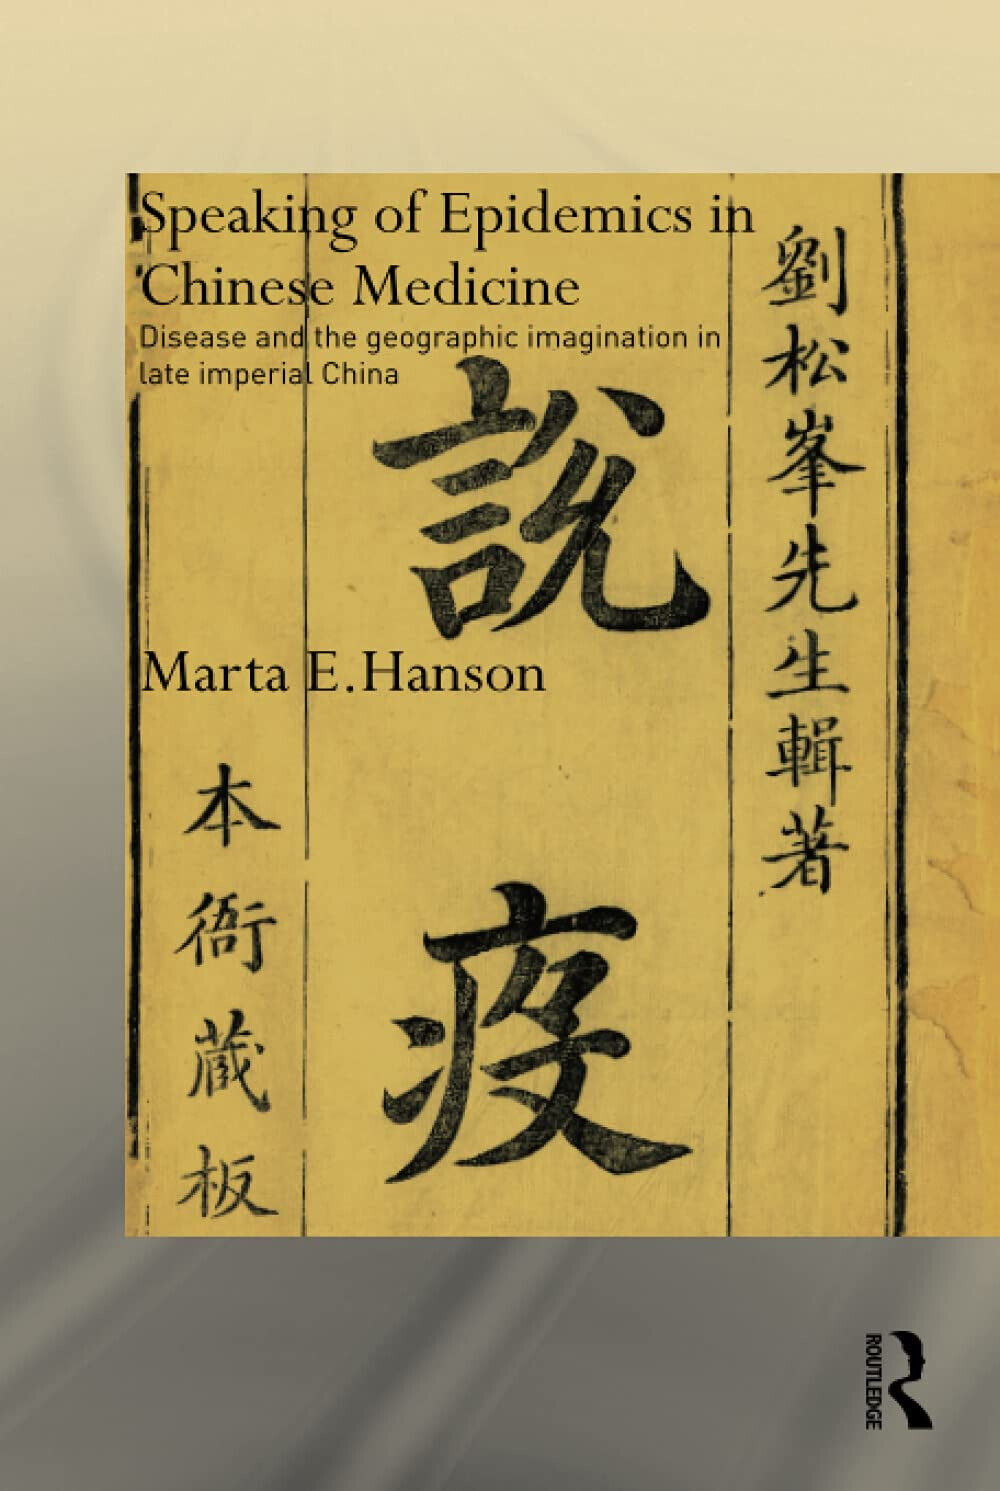 Speaking of Epidemics in Chinese Medicine - Marta - Routledge, 2011